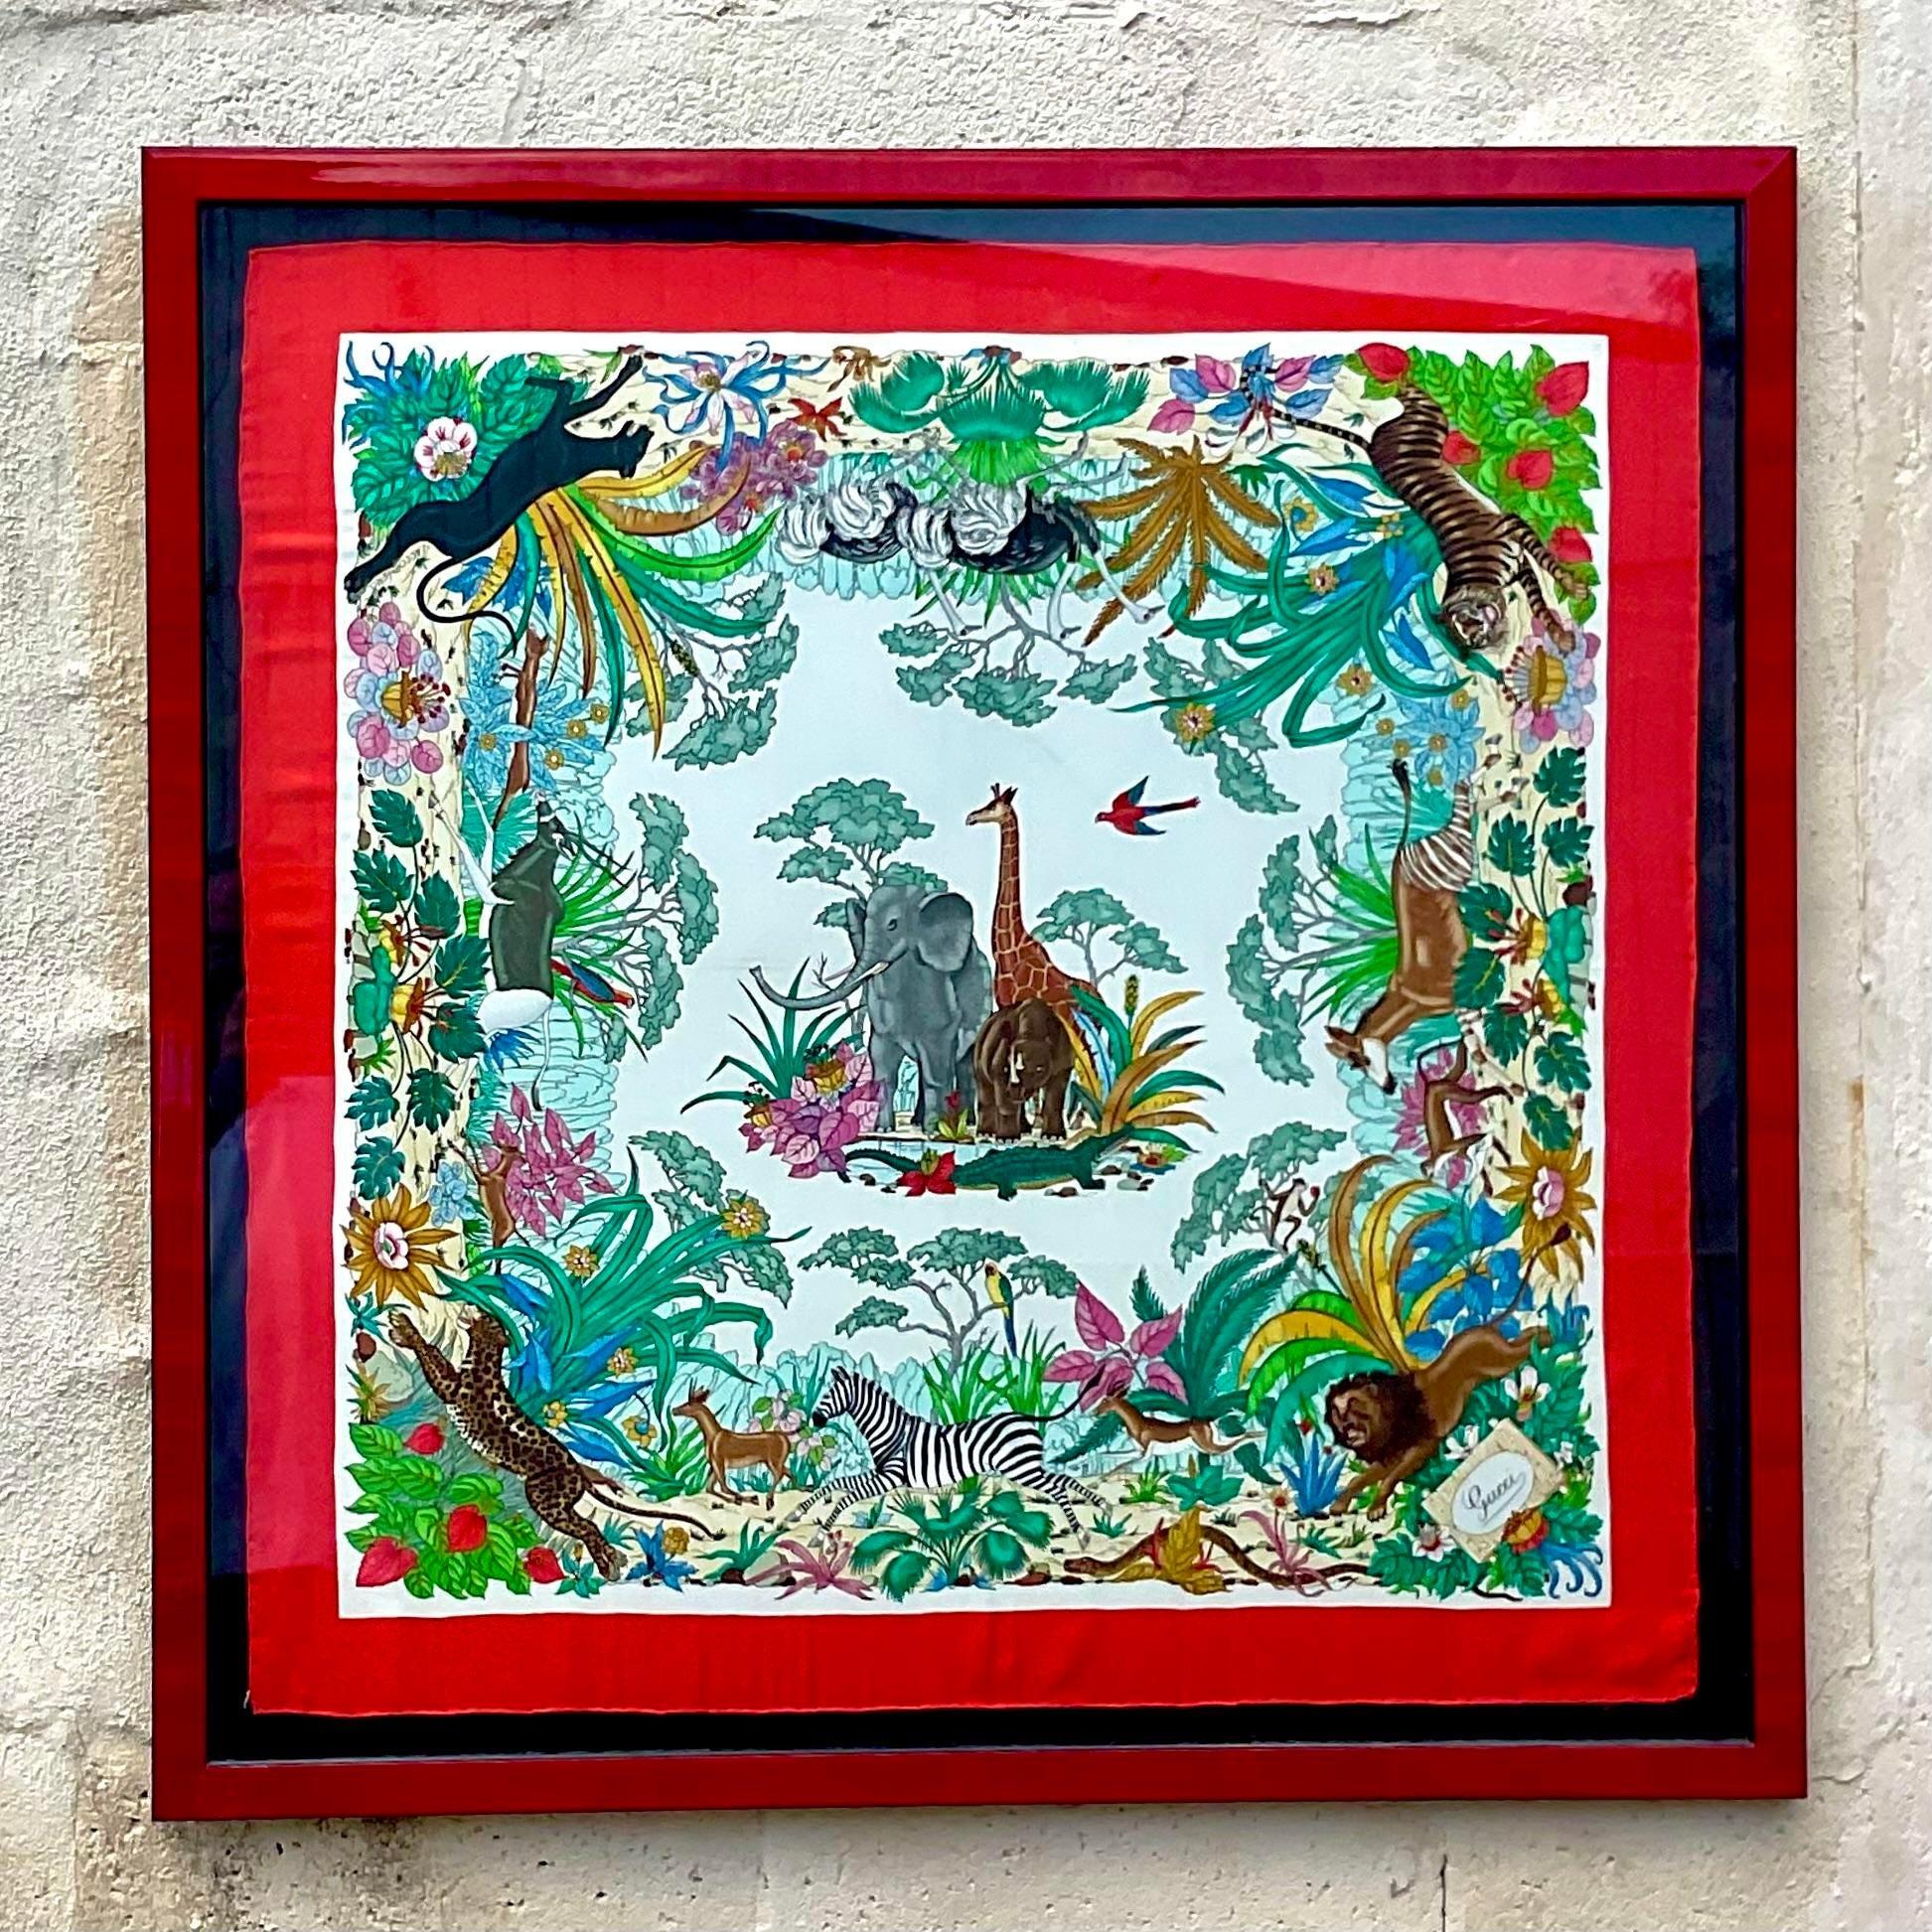 A fabulous vintage Boho framed silk scarf. A chic jungle print from the House of Gucci. Signed on the bottom. Acquired from a Palm Beach estate as a gift from her grandmother.